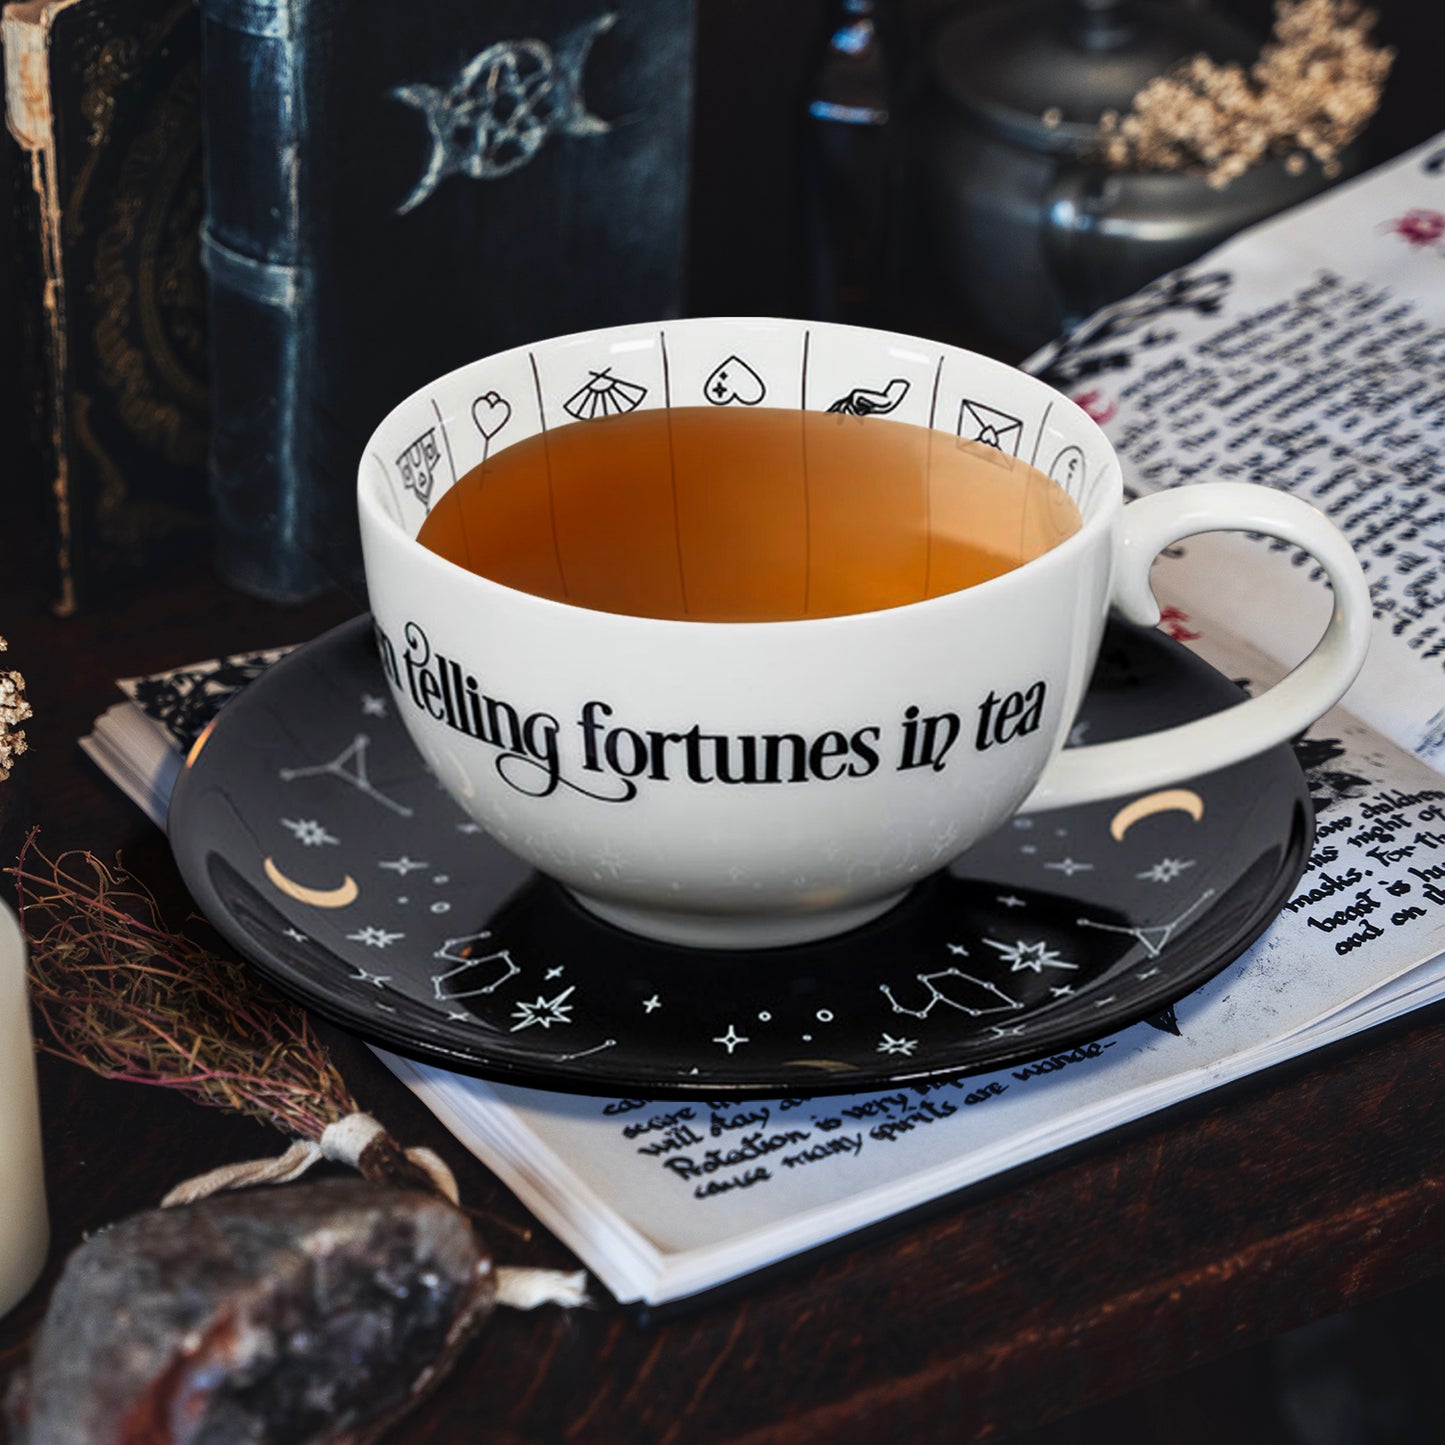 A white teacup with a black saucer, sitting on a book page. around the cup are books, herbs, and other items used in spellcasting and fortune telling.